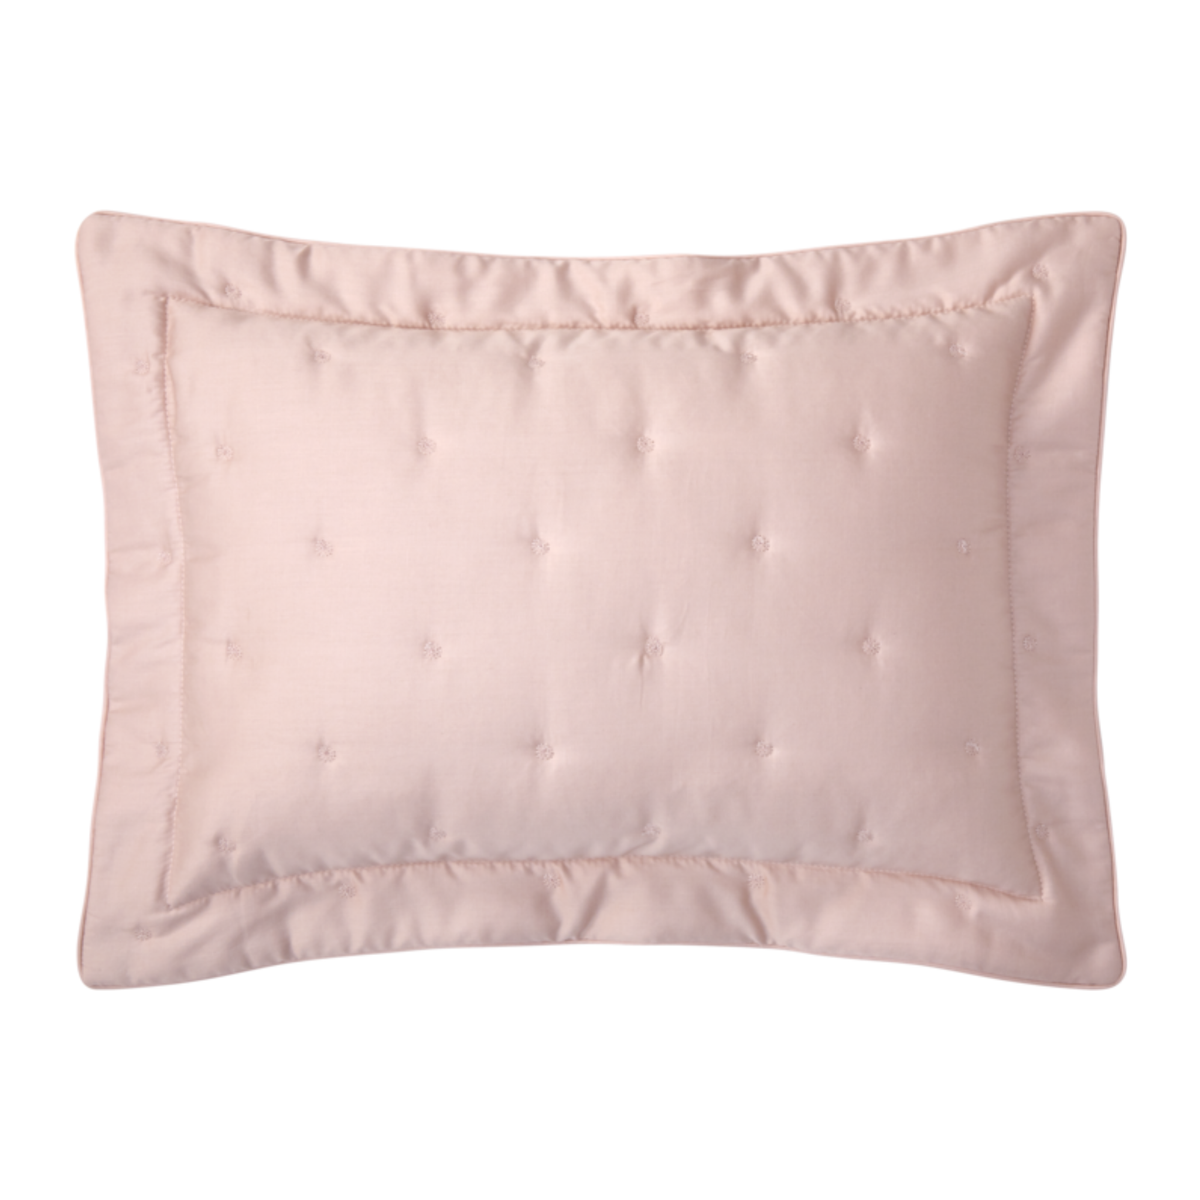 Sham of Yves Delorme Quilted Triomphe Bedding in Poudre Color